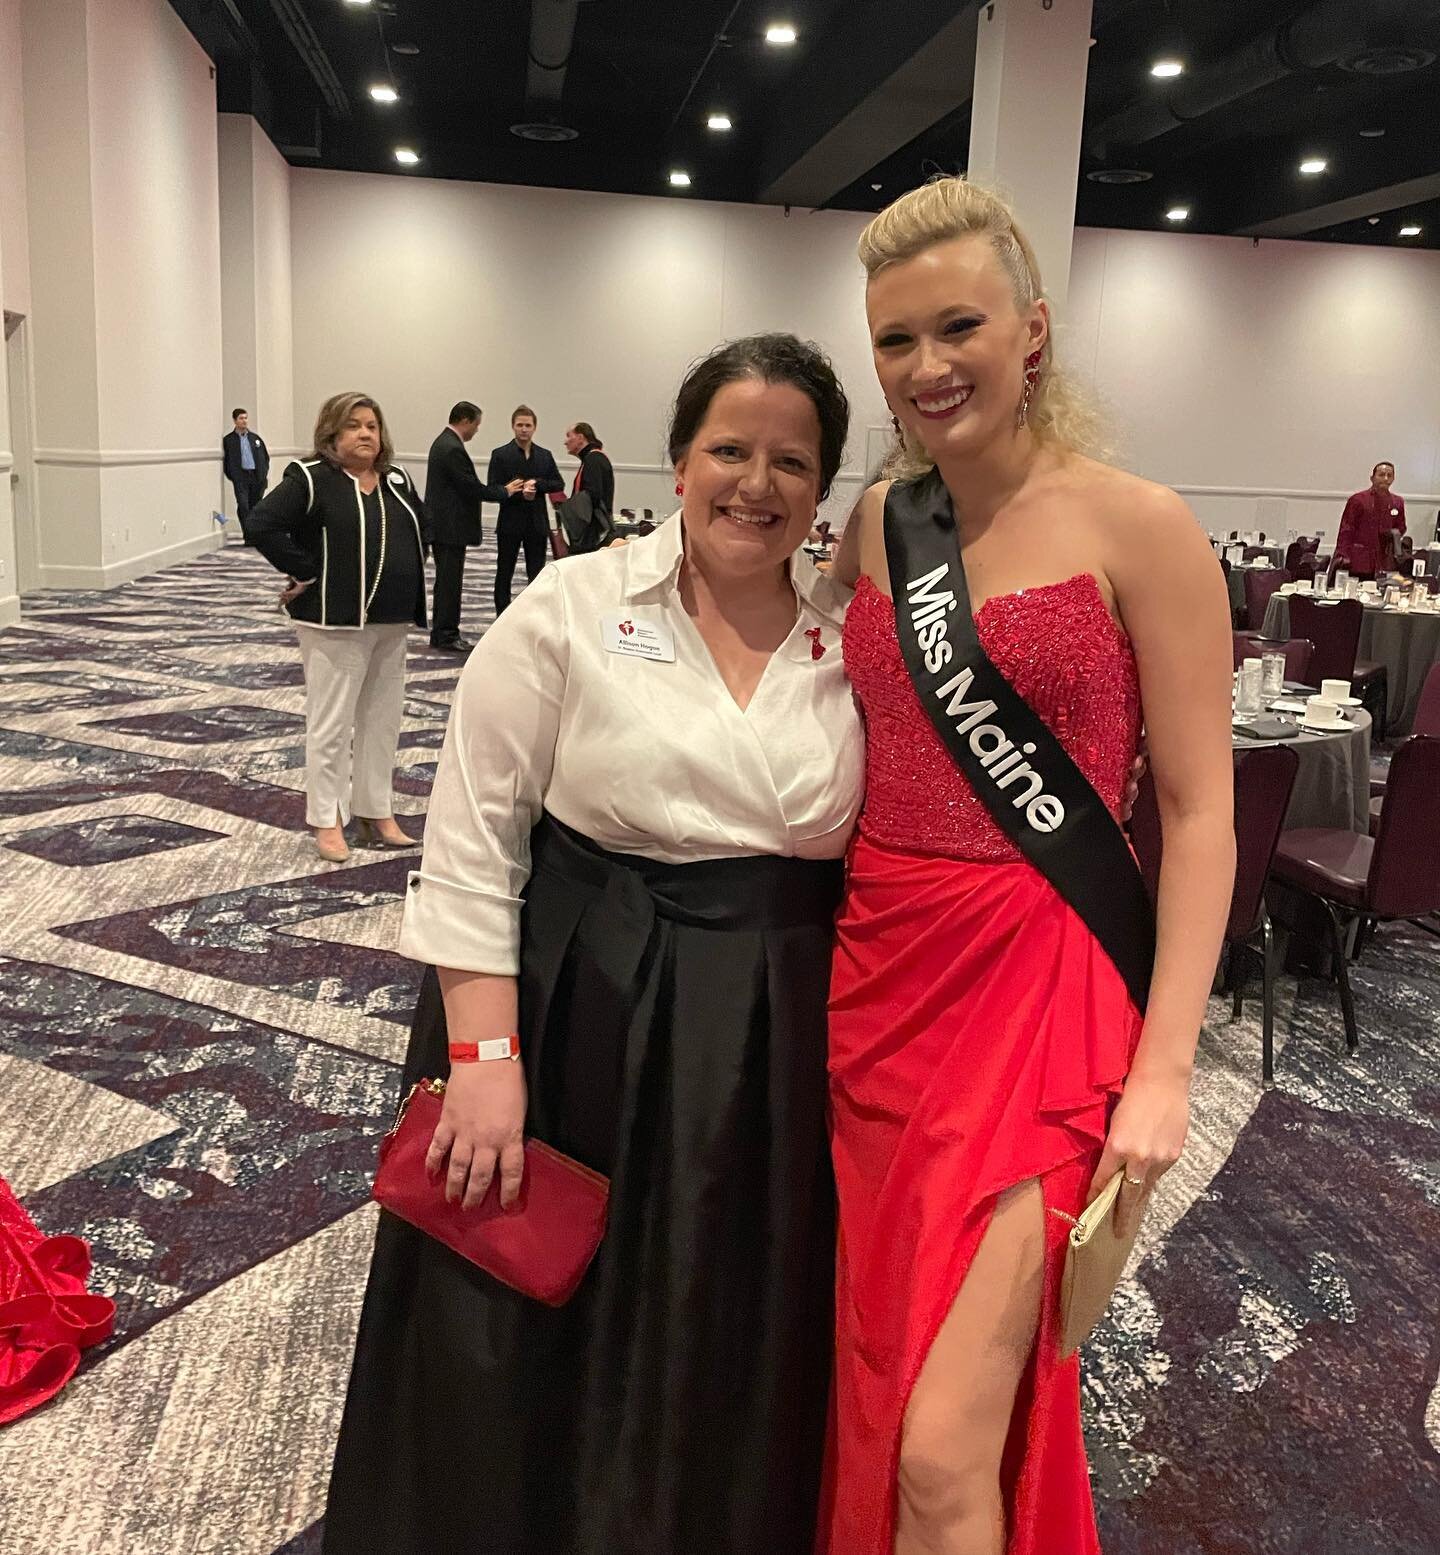 Tonight was the Go Red for Women Gala to benefit the American Heart Association! I got to meet Allison from @american_heart earlier this week, she is truly a gem and does such amazing work! 

I had so much fun attending the gala and also closing out 